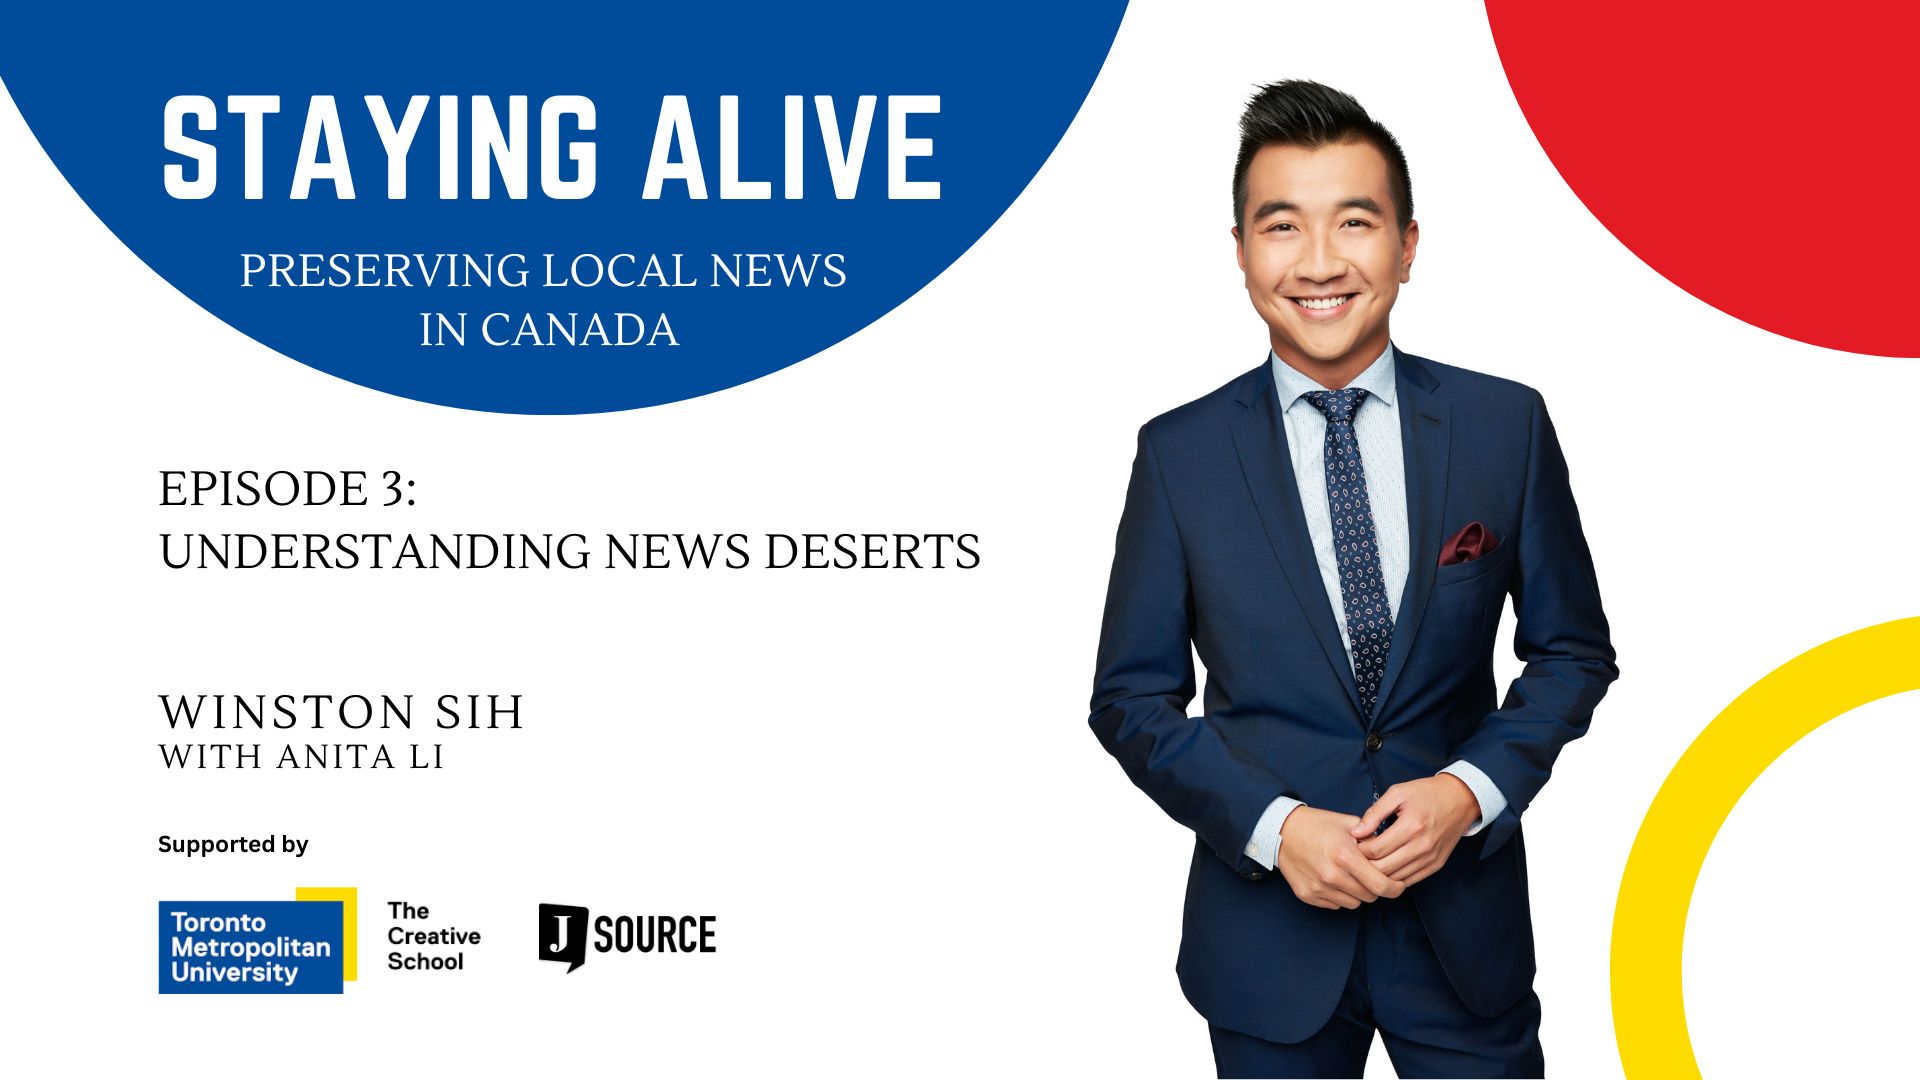 Staying Alive Preserving Local News in Canada
Episode 3
Understanding News Deserts Winston Sih with Anita Li Supported by the Creative School at Toronto Metropolitan University and J-Source